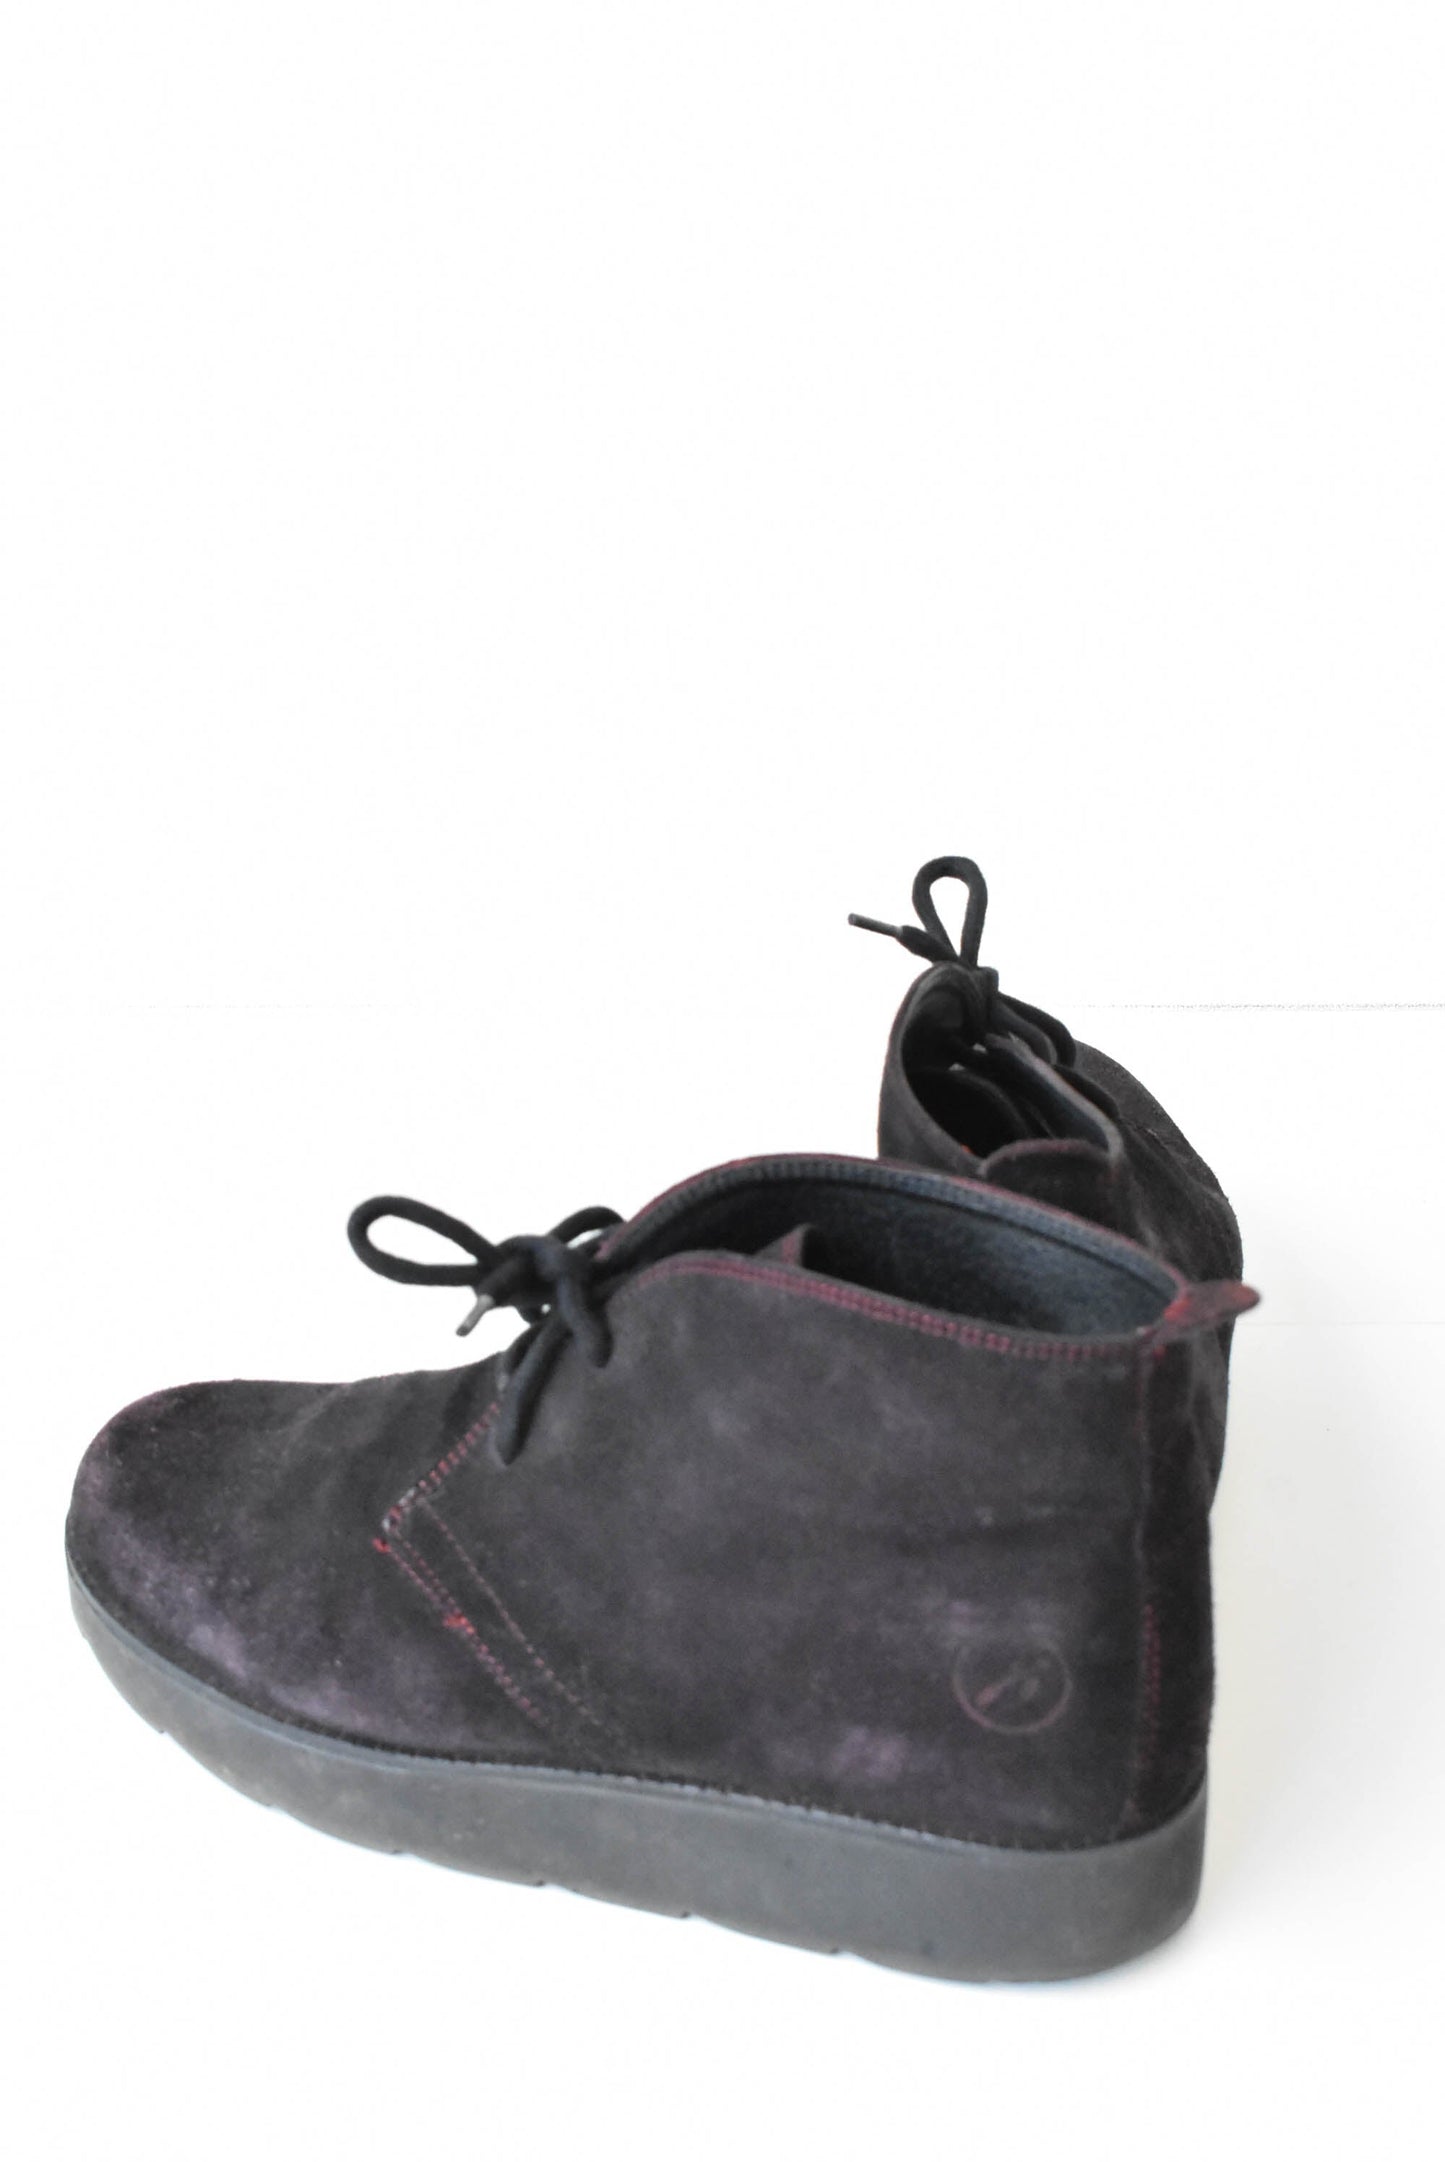 Bronx suede grape ankle boots, size 41